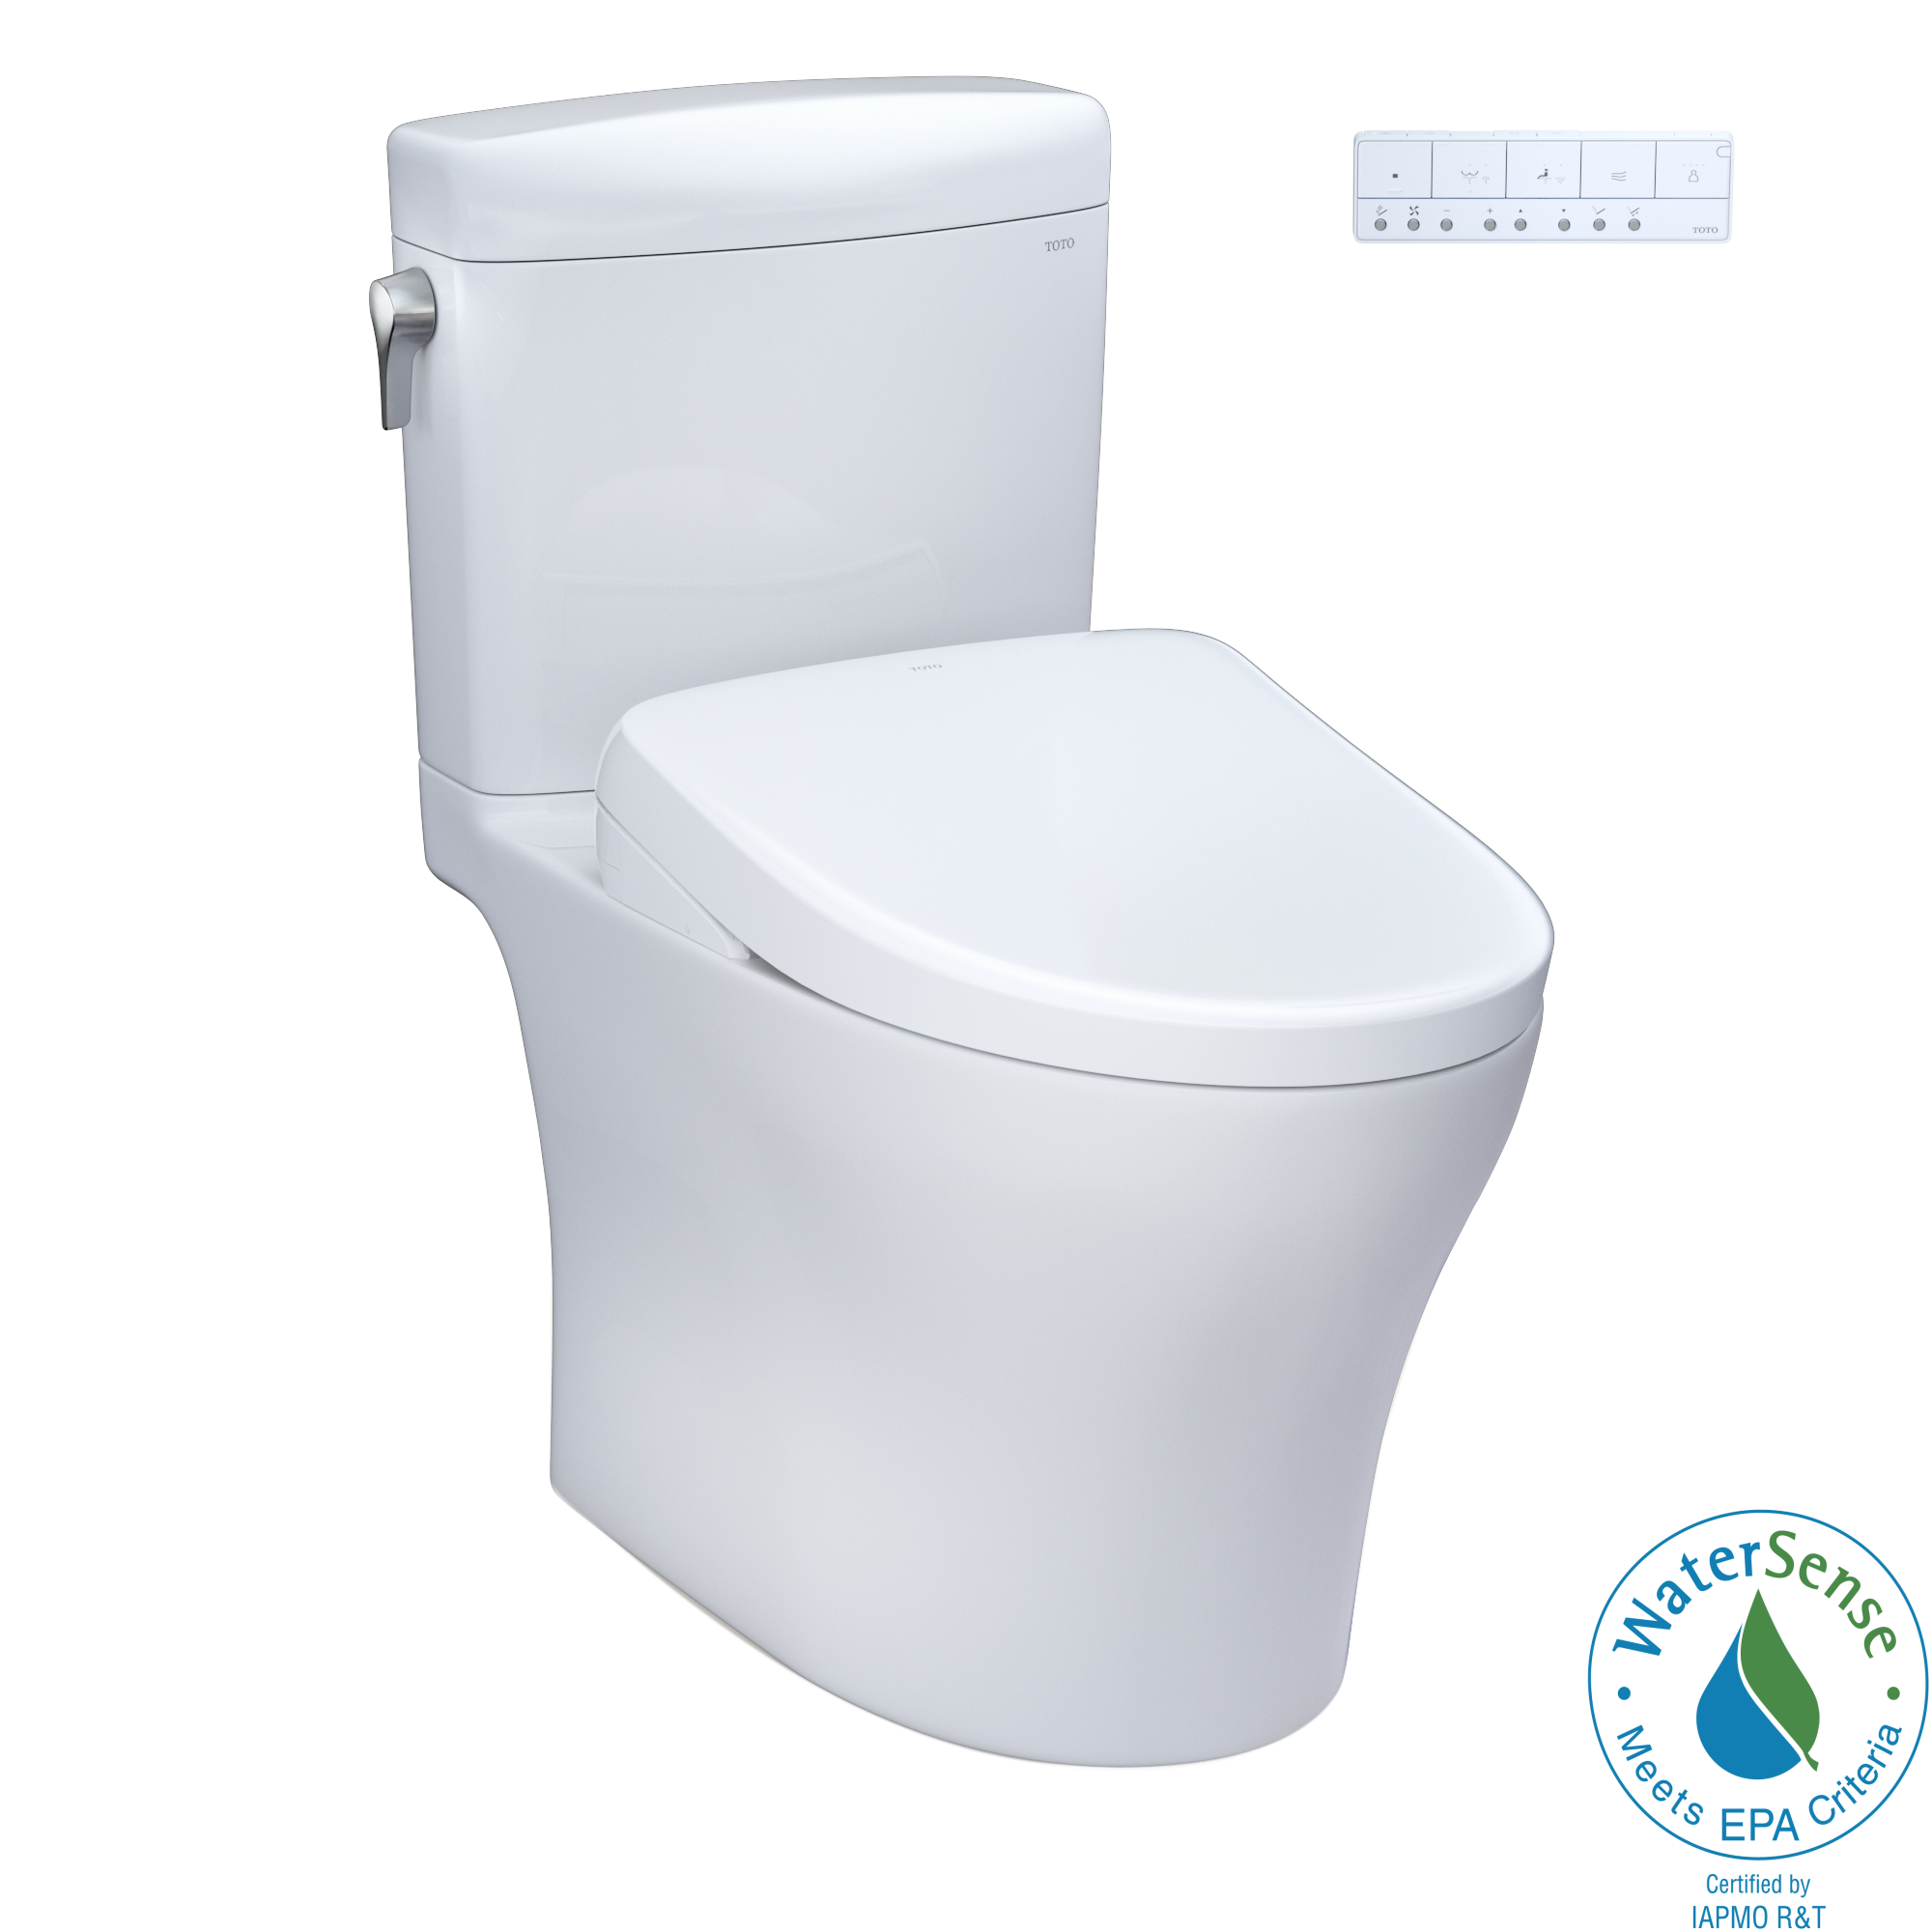 TOTO WASHLET+ Aquia IV Cube Two-Piece Elongated Dual Flush 1.28 and 0.9 GPF Toilet with S7A Contemporary Bidet Seat, Cotton White - MW4364736CEMFGN#01, MW4364736CEMFGNA#01